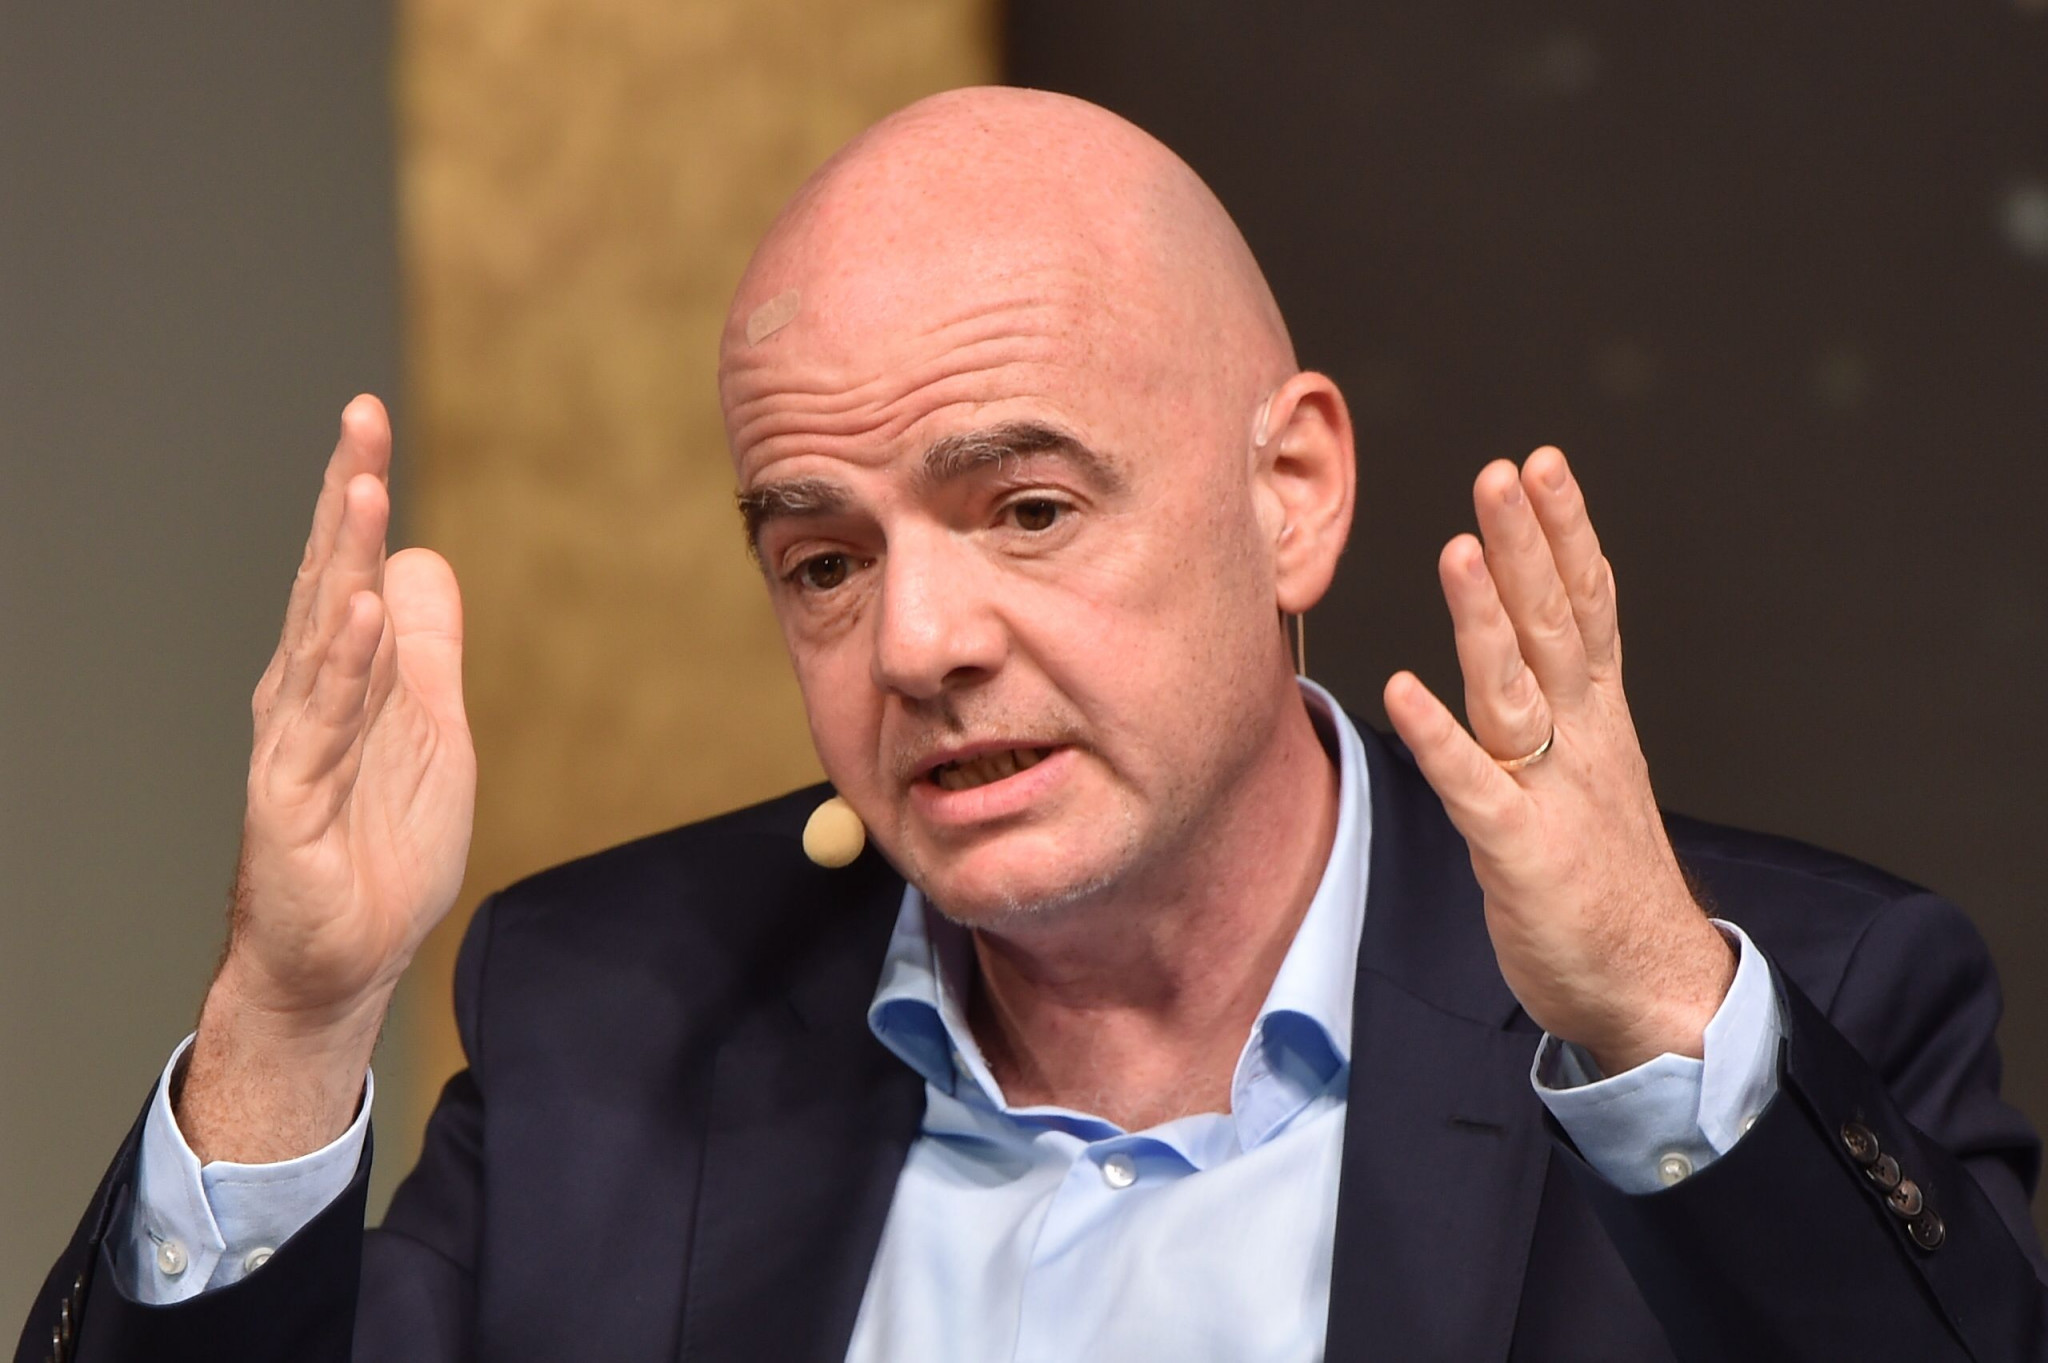 Swiss prosecutor recommends criminal investigation into Infantino's use of private jet